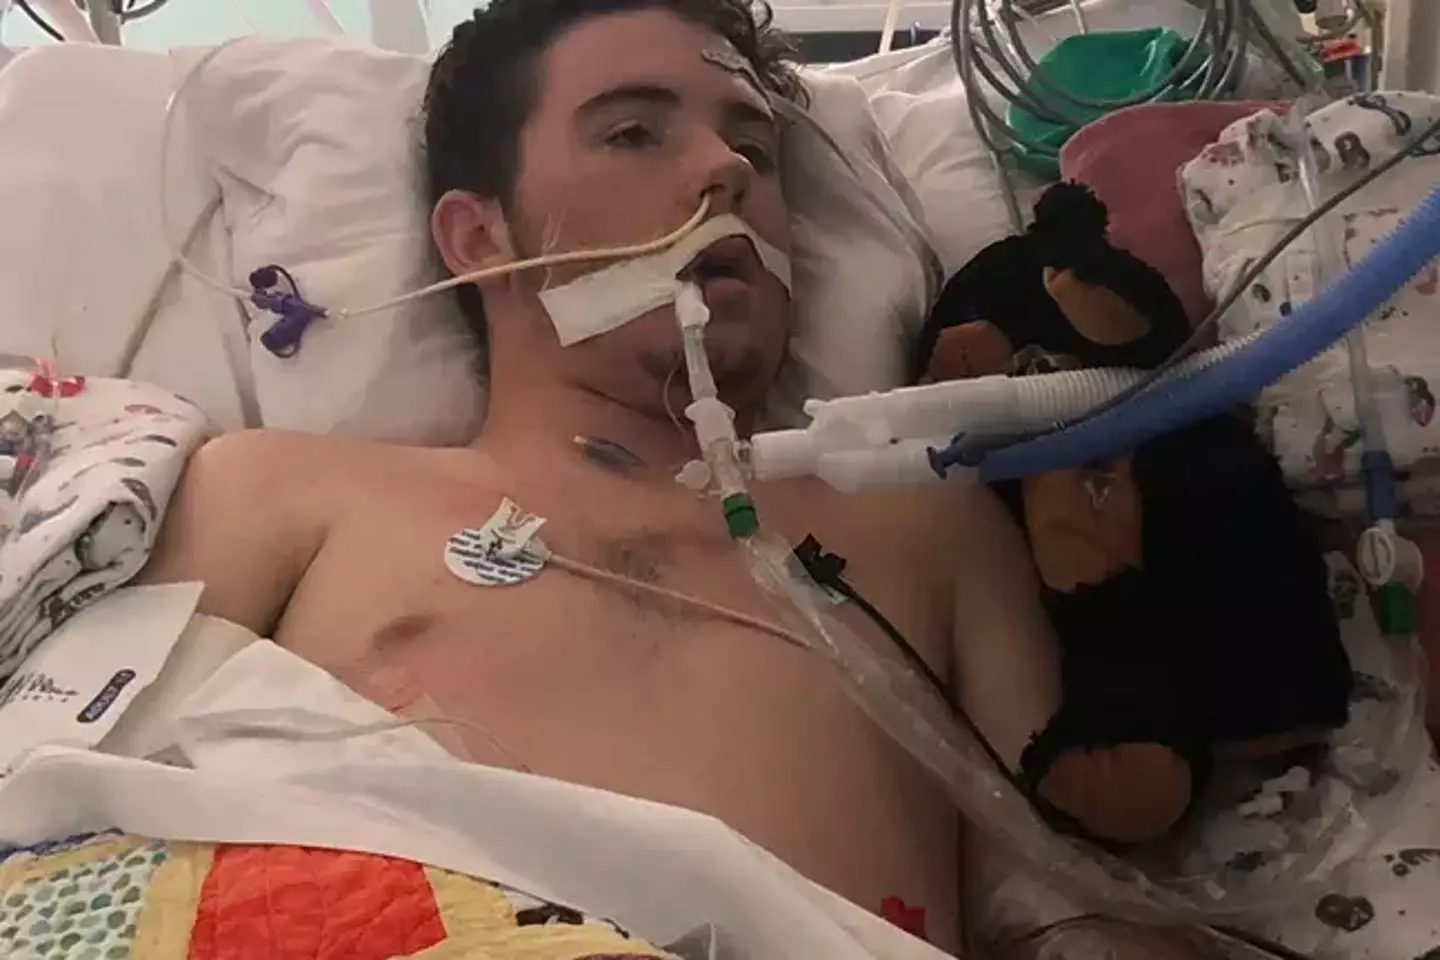 A 17-year-old vaper from Texas was hospitalised for weeks due to lung failure.